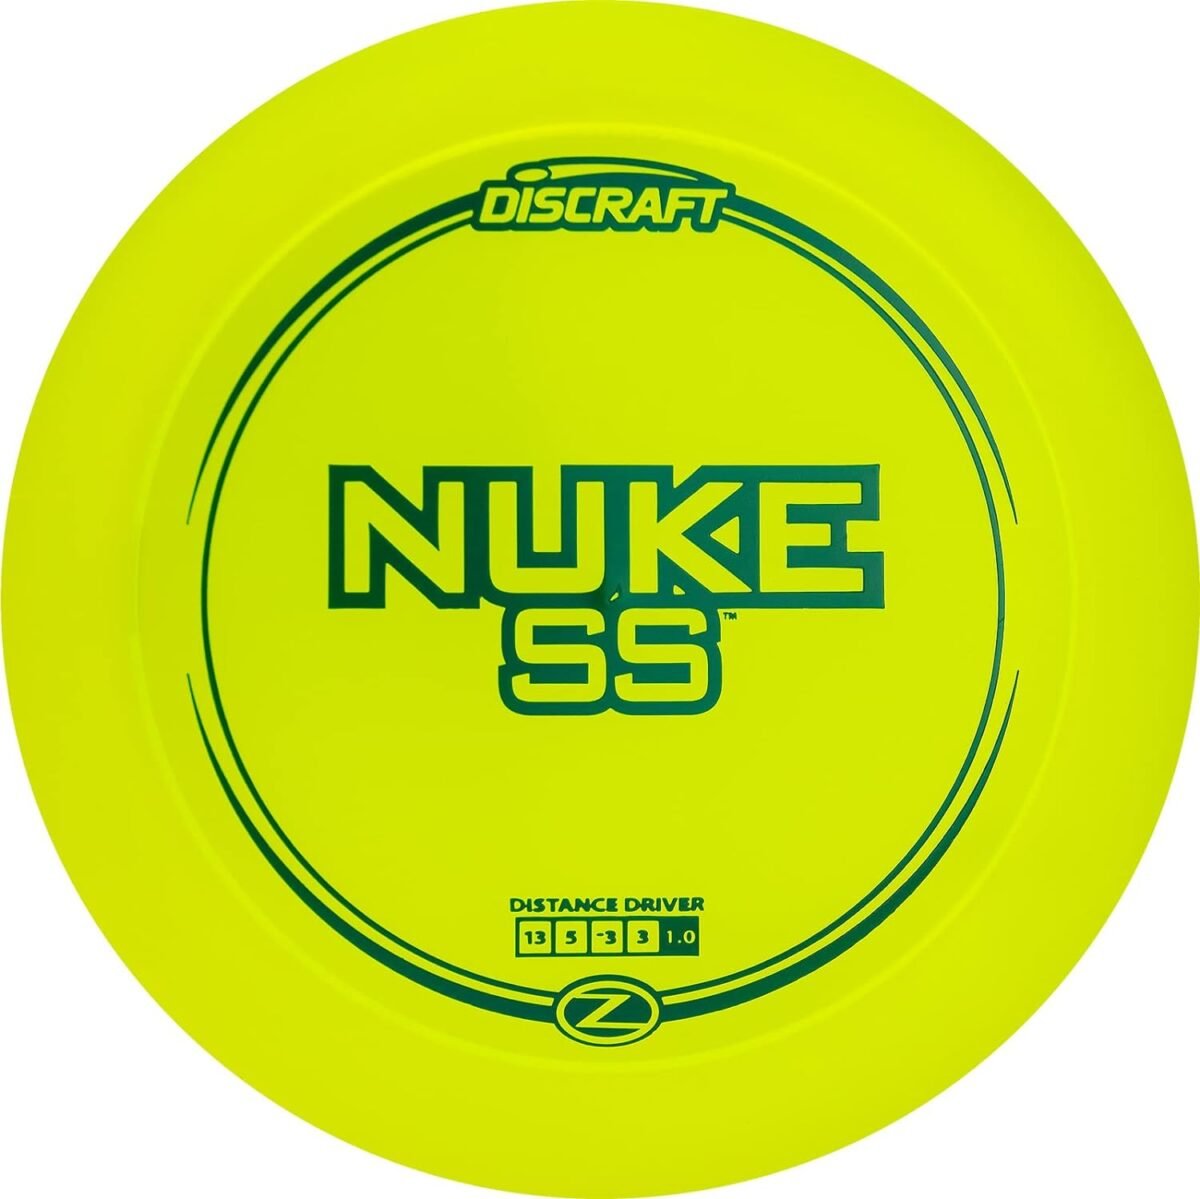 Golf Disc Review: Comparing Discraft Z Lite Thrasher, Scorch, Z Heat, and Nuke SS